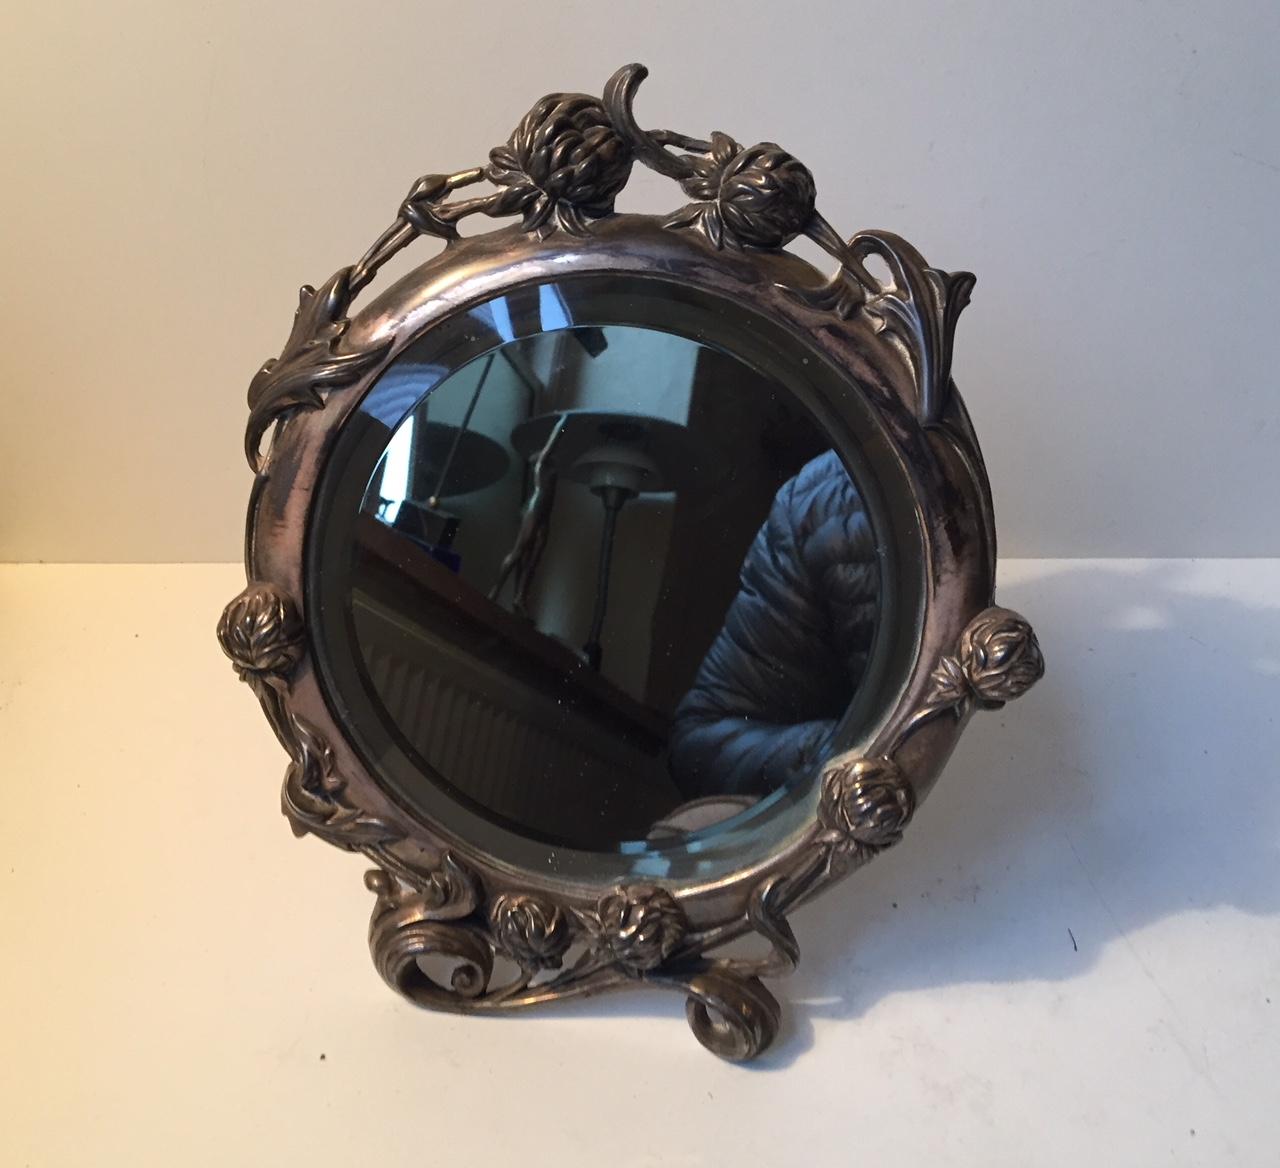 Victorian table or wall mounted vanity mirror composed of richly detailed pewter. It was manufactured in either France or England during the mid-late 19th century. The floral details are rather elongated and the style of this piece flirts with Art